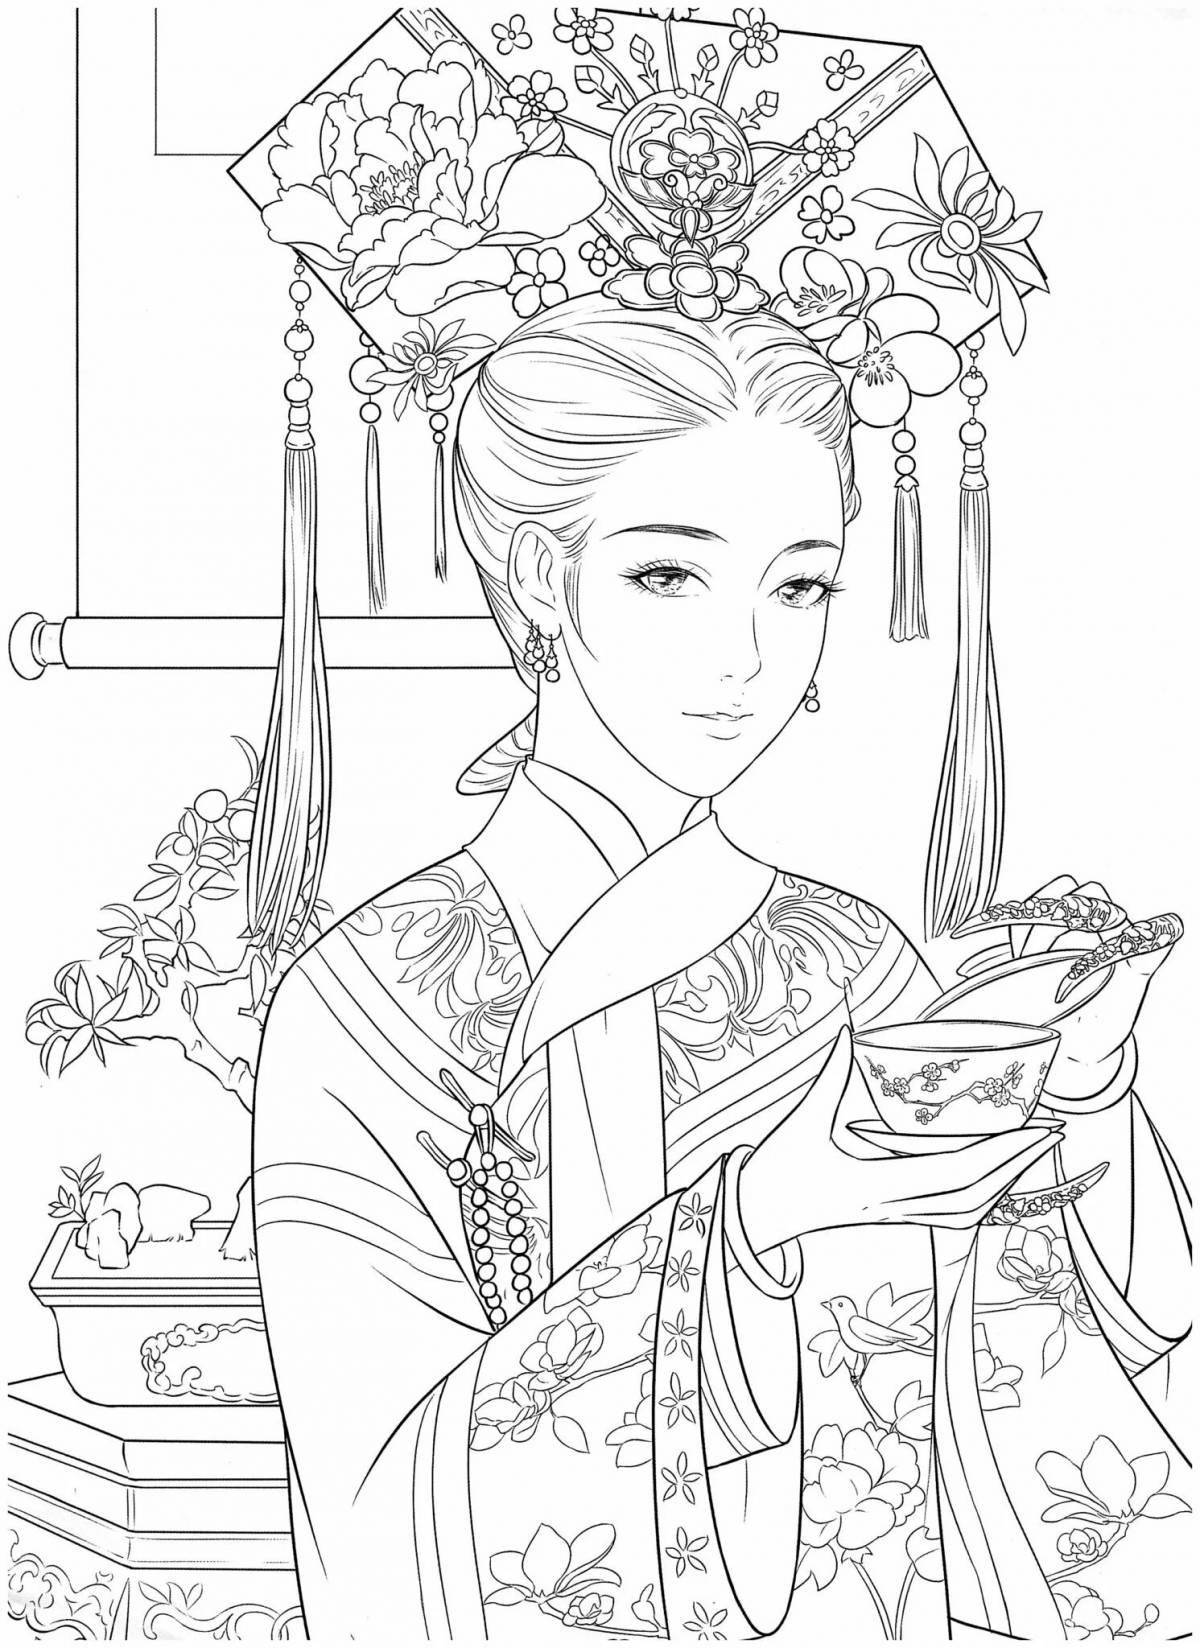 Coloring book glowing Chinese woman